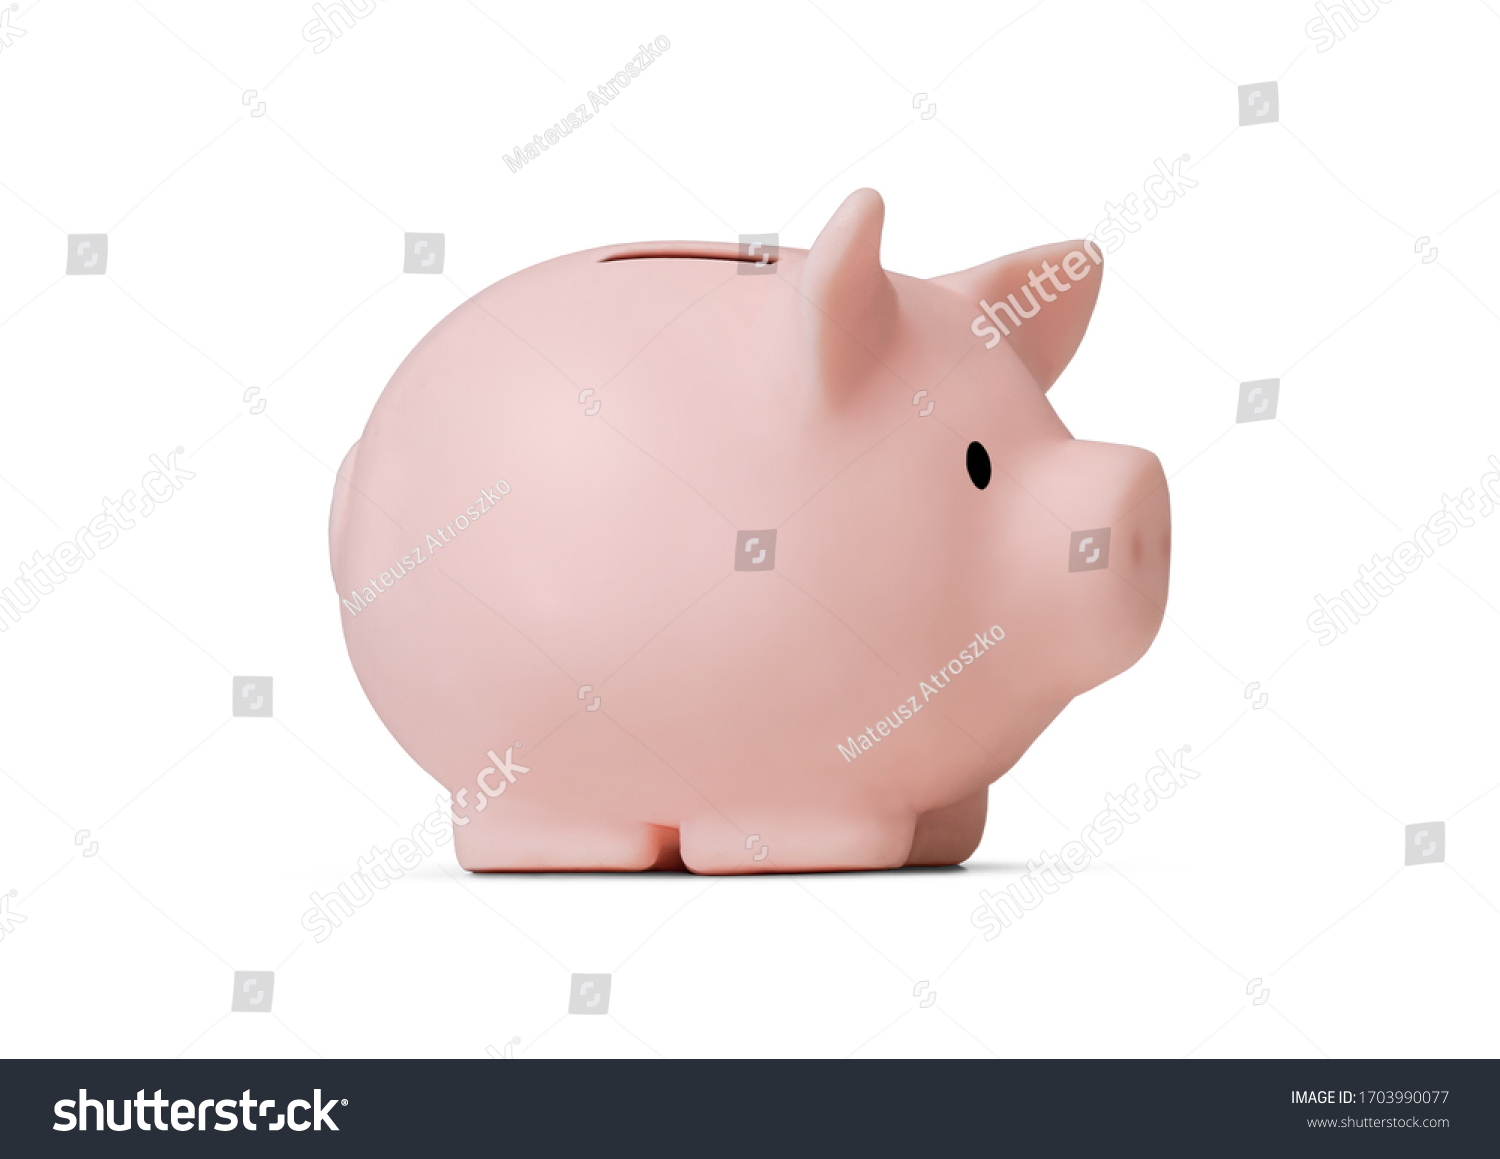 Piggy bank isolated on white background #1703990077